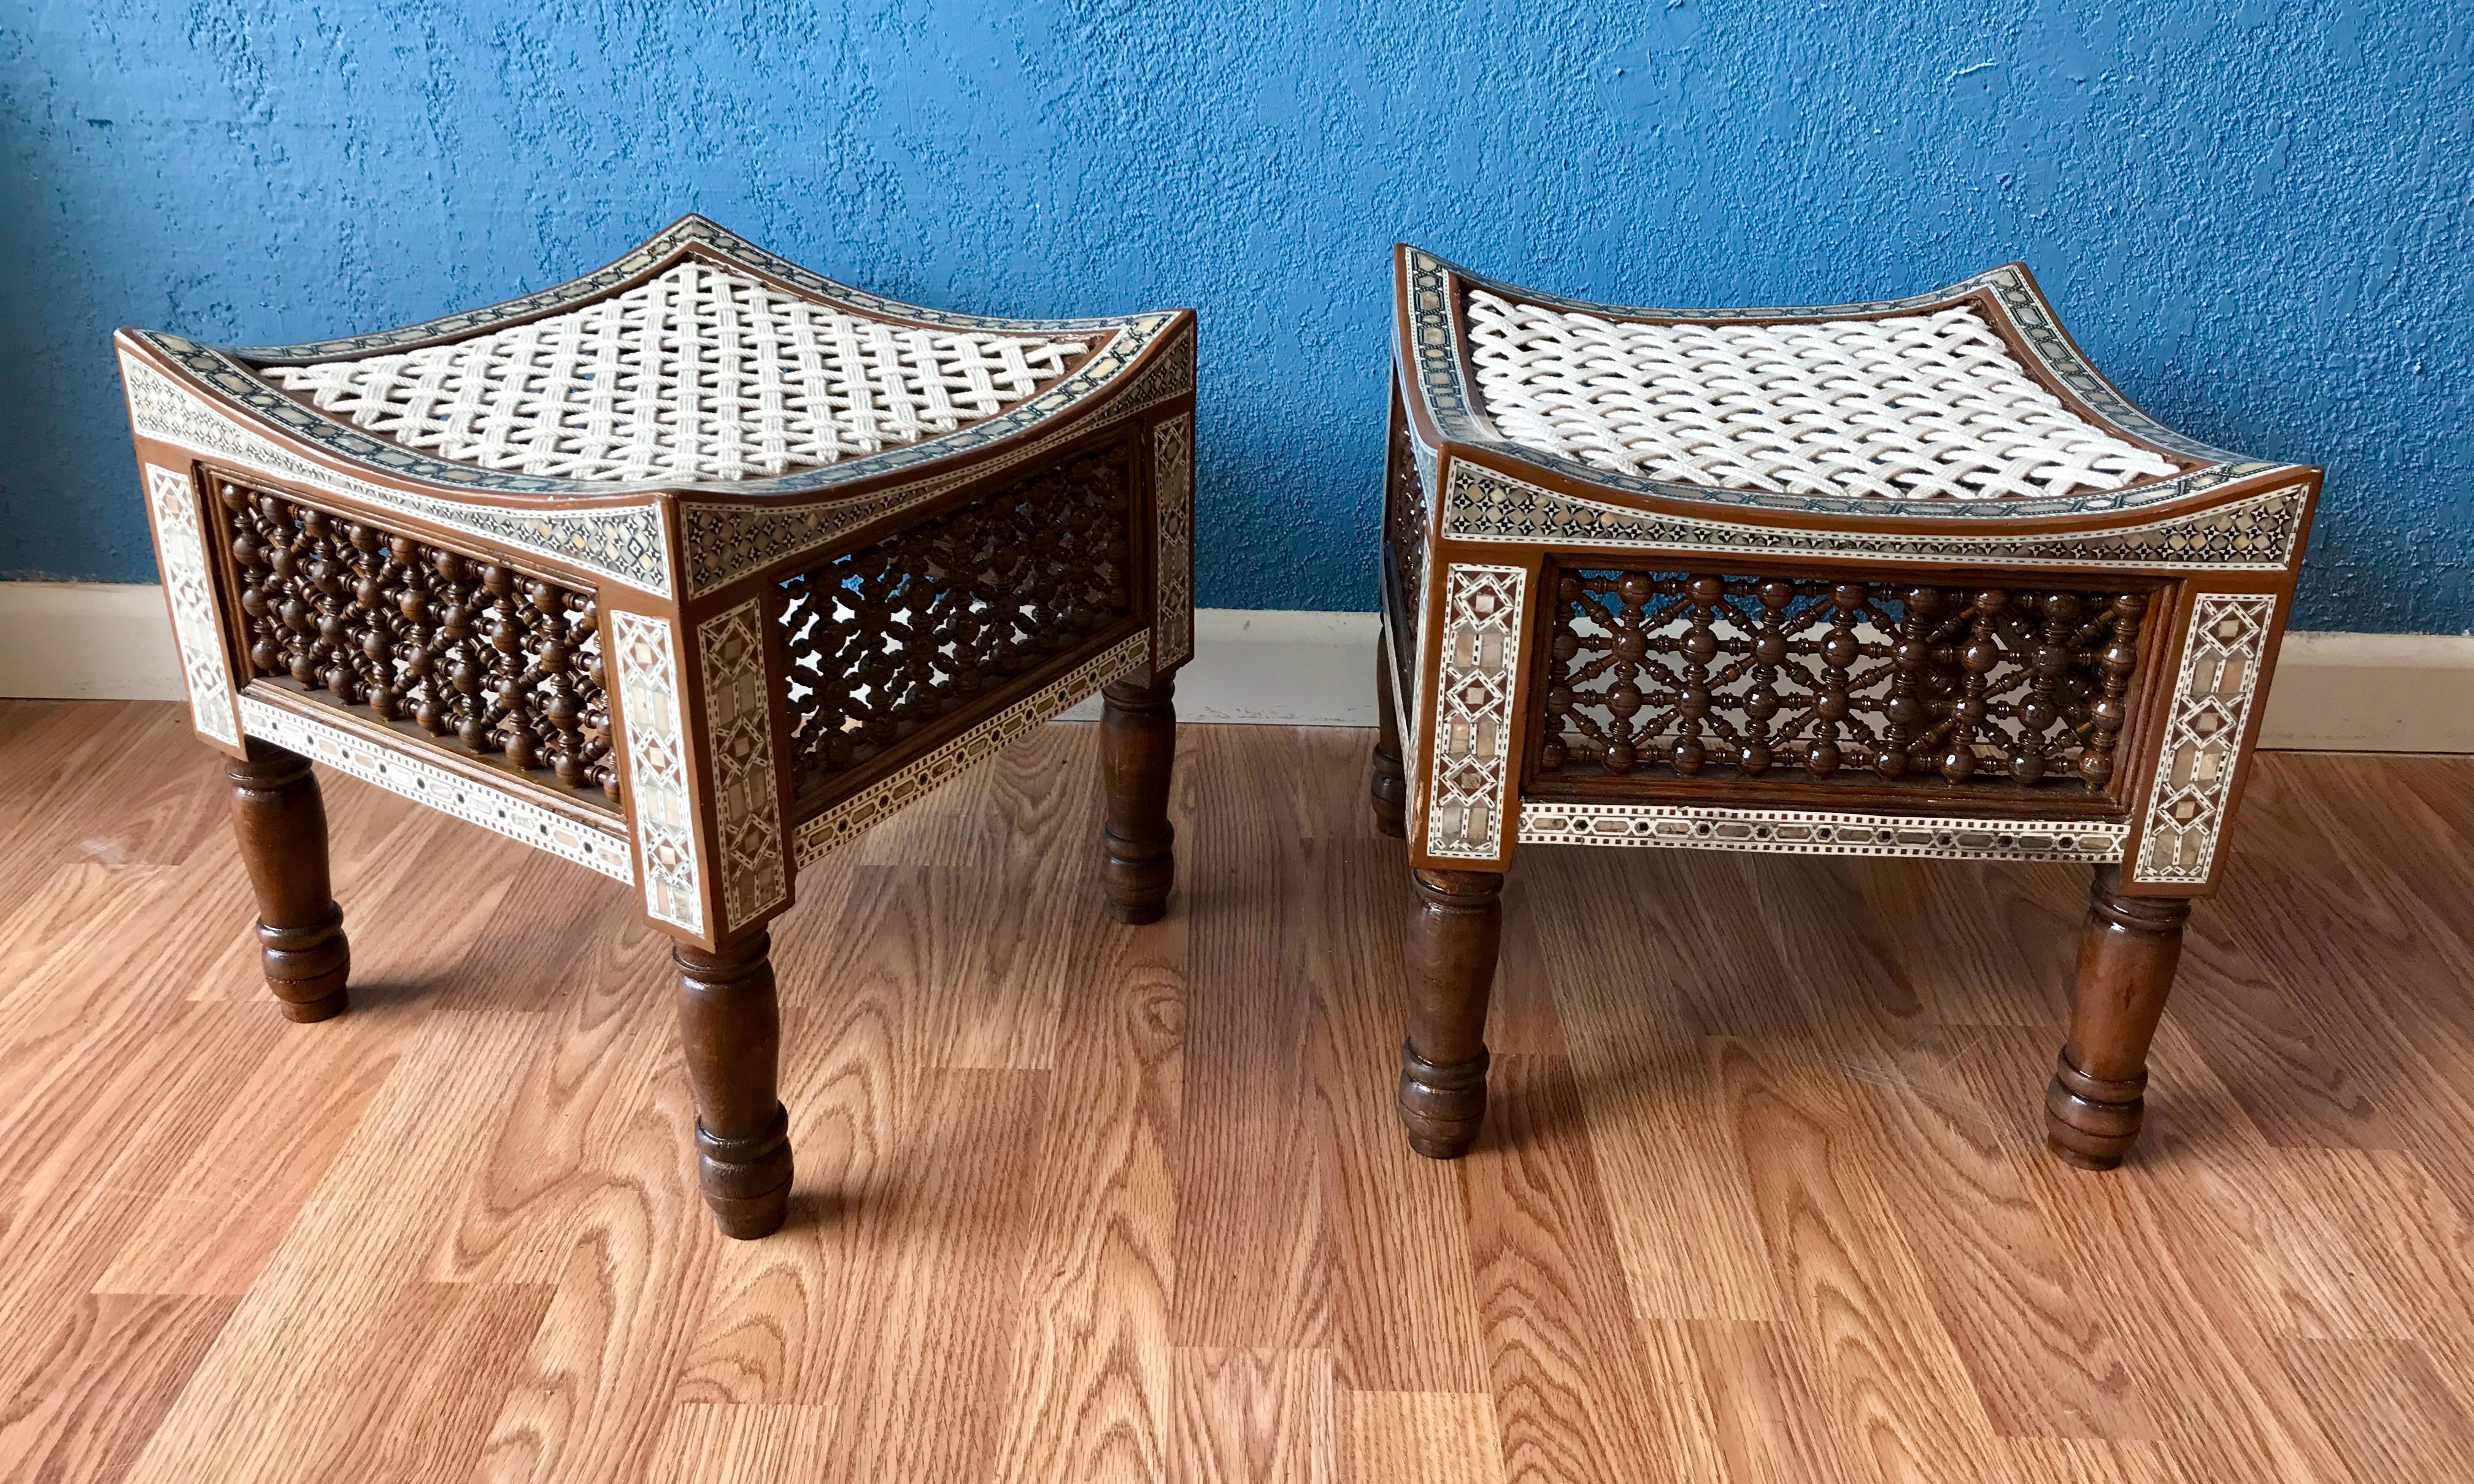 A highly stylized pair with elaborate inlays of mother-of-pearl and camel bone.
The side panels intricately carved. A Thebes like form. The tops are tied with intertwined 